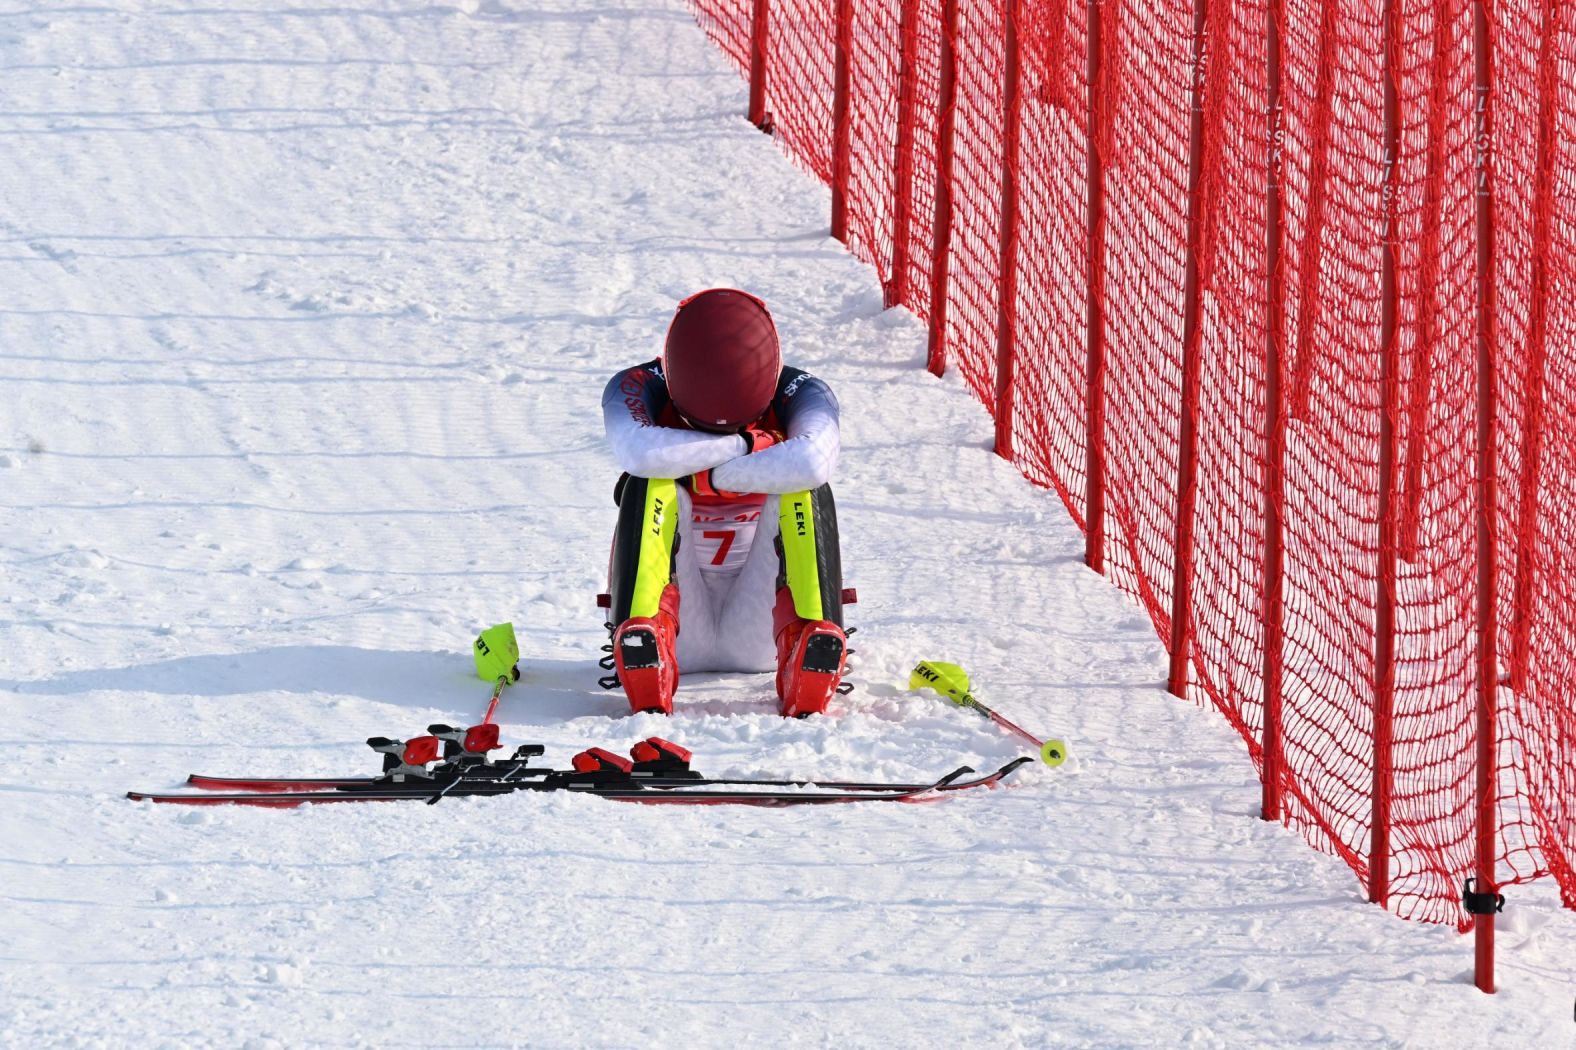 A dejected Mikaela Shiffrin sits on the side of the slalom course after she <a href="index.php?page=&url=https%3A%2F%2Fwww.cnn.com%2Fworld%2Flive-news%2Fbeijing-winter-olympics-02-09-22-spt%2Fh_49a3673f53f4141b60a6a063dba18c4b" target="_blank">missed a gate on her first run and was disqualified</a> on February 9. The American star was one of the favorites in the event. Her miscue came two days after <a href="index.php?page=&url=https%3A%2F%2Fwww.cnn.com%2Fworld%2Flive-news%2Fbeijing-winter-olympics-02-07-22-spt%2Fh_c67e815b4abe2381f4ae0467622fa538" target="_blank">a shocking fall in the giant slalom.</a>